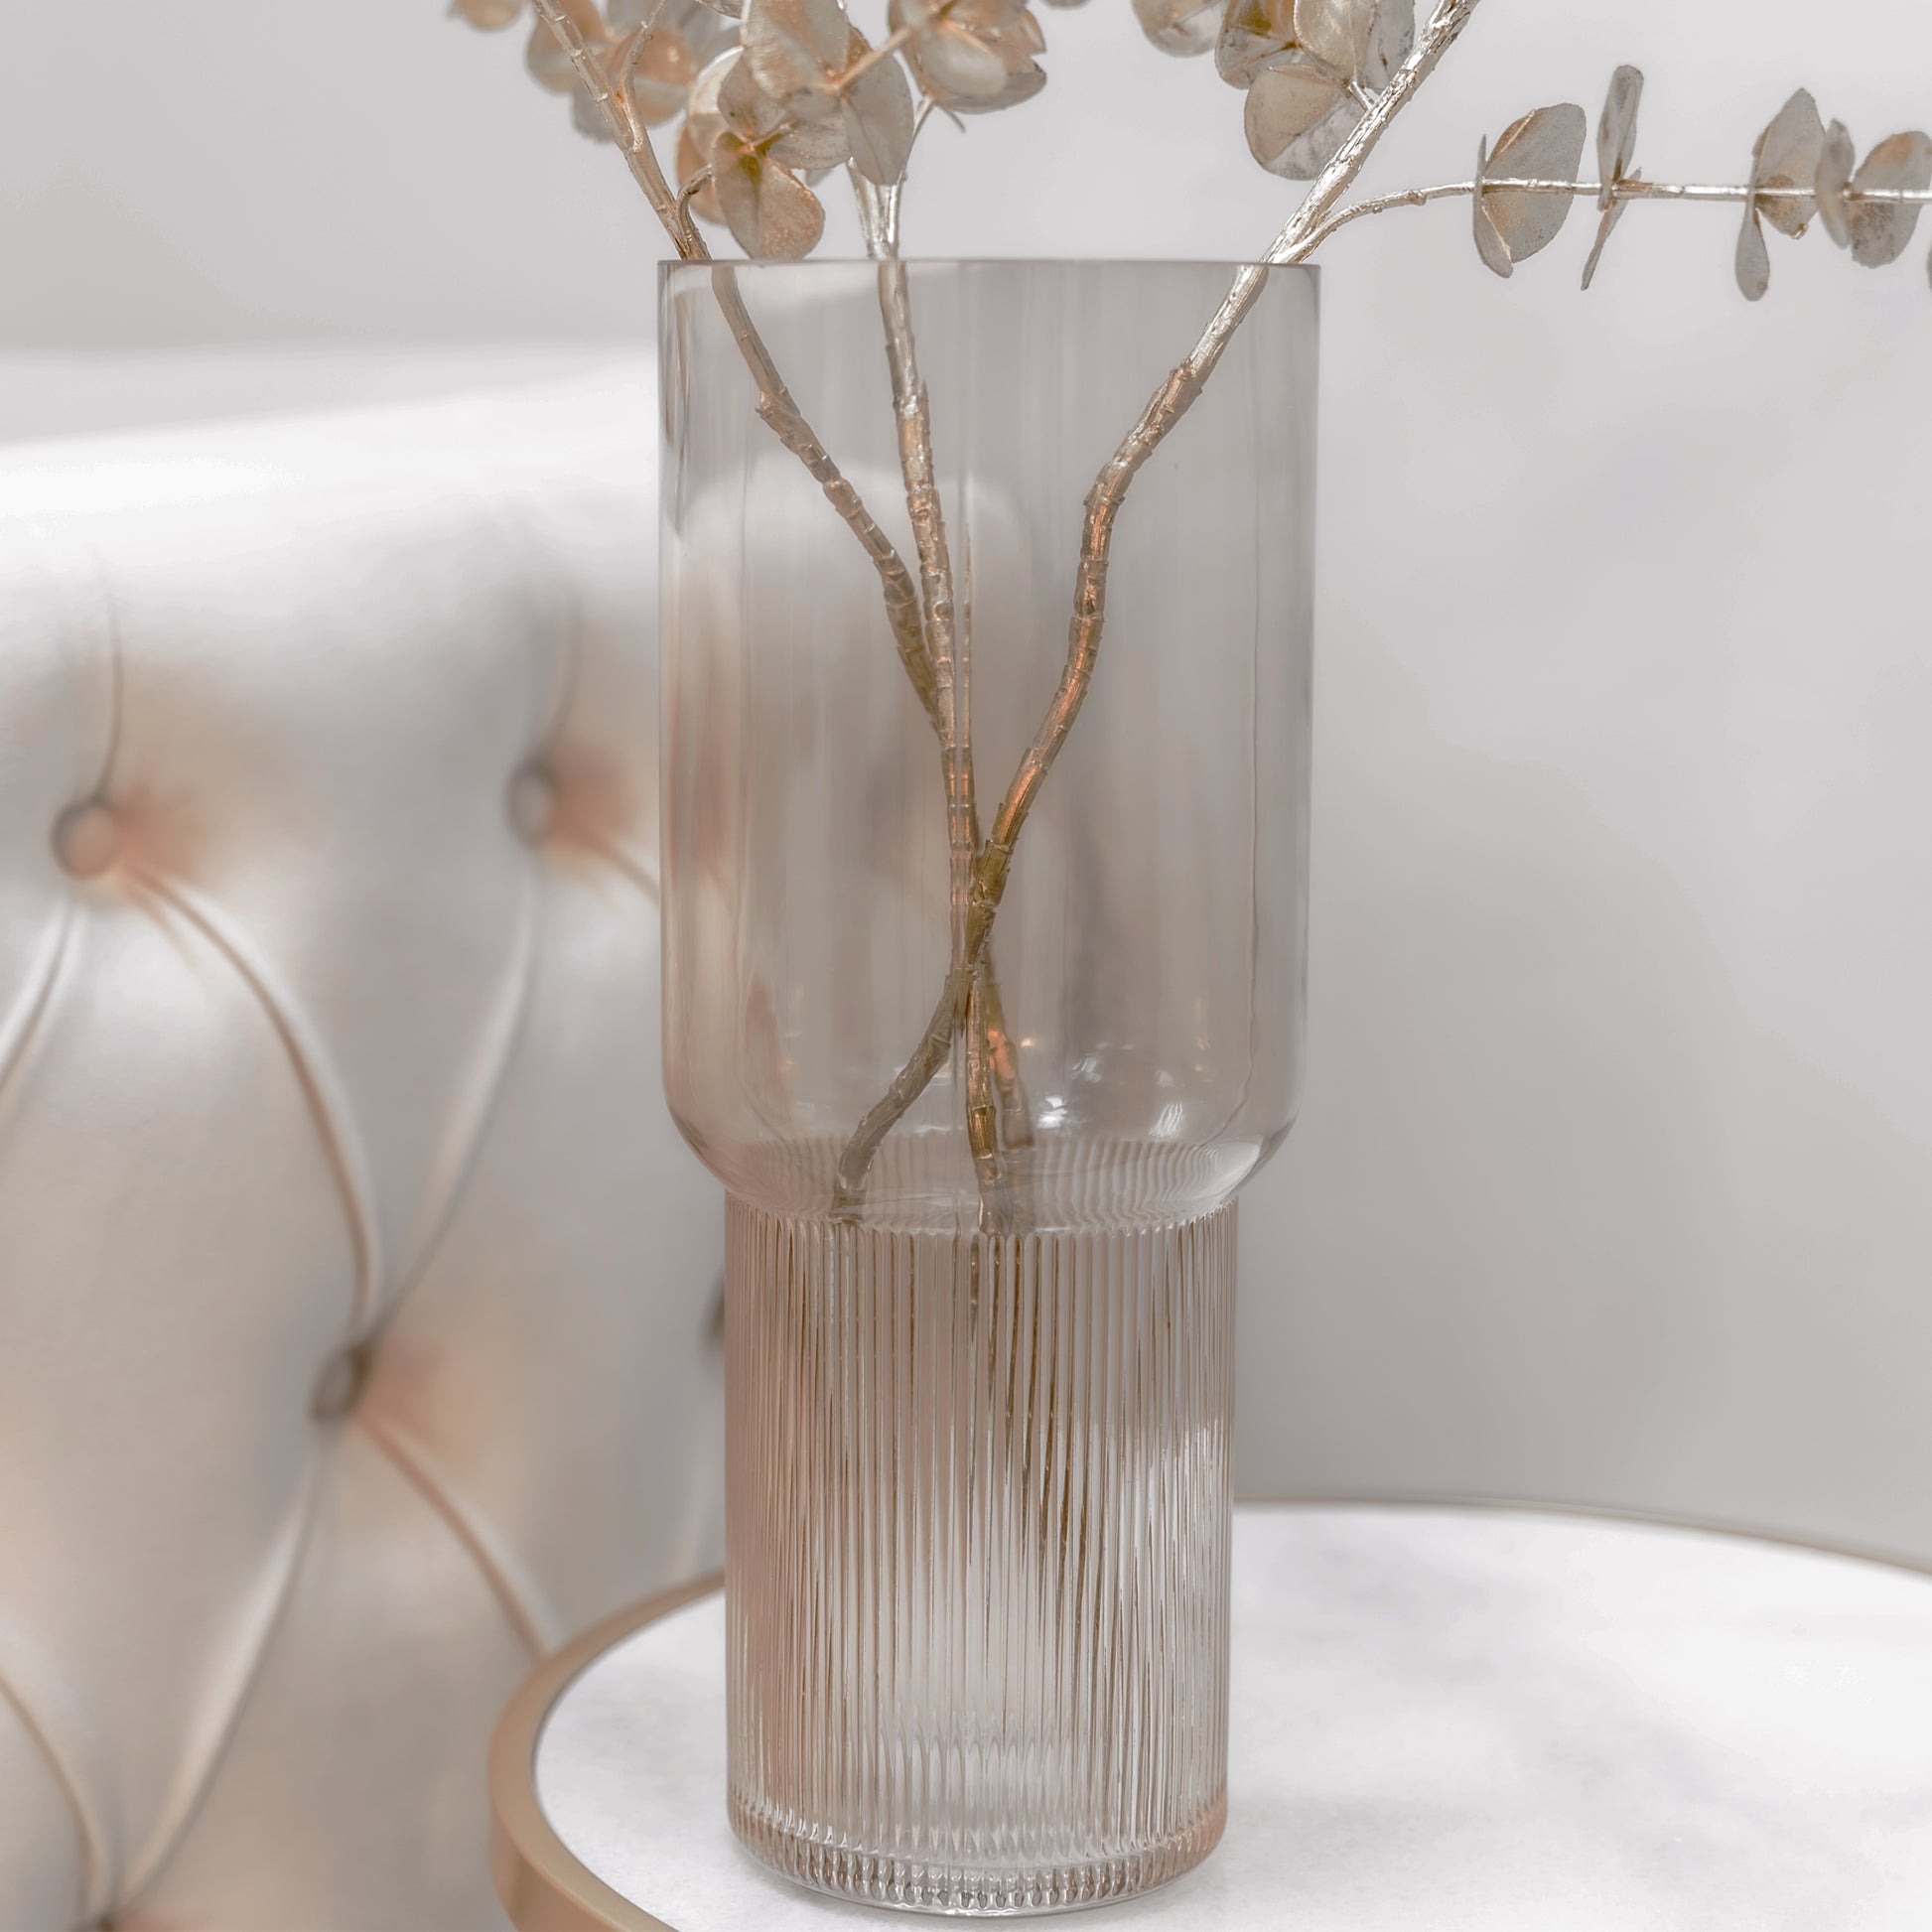 Ribbed Tall Glass Vase in Warm Beige